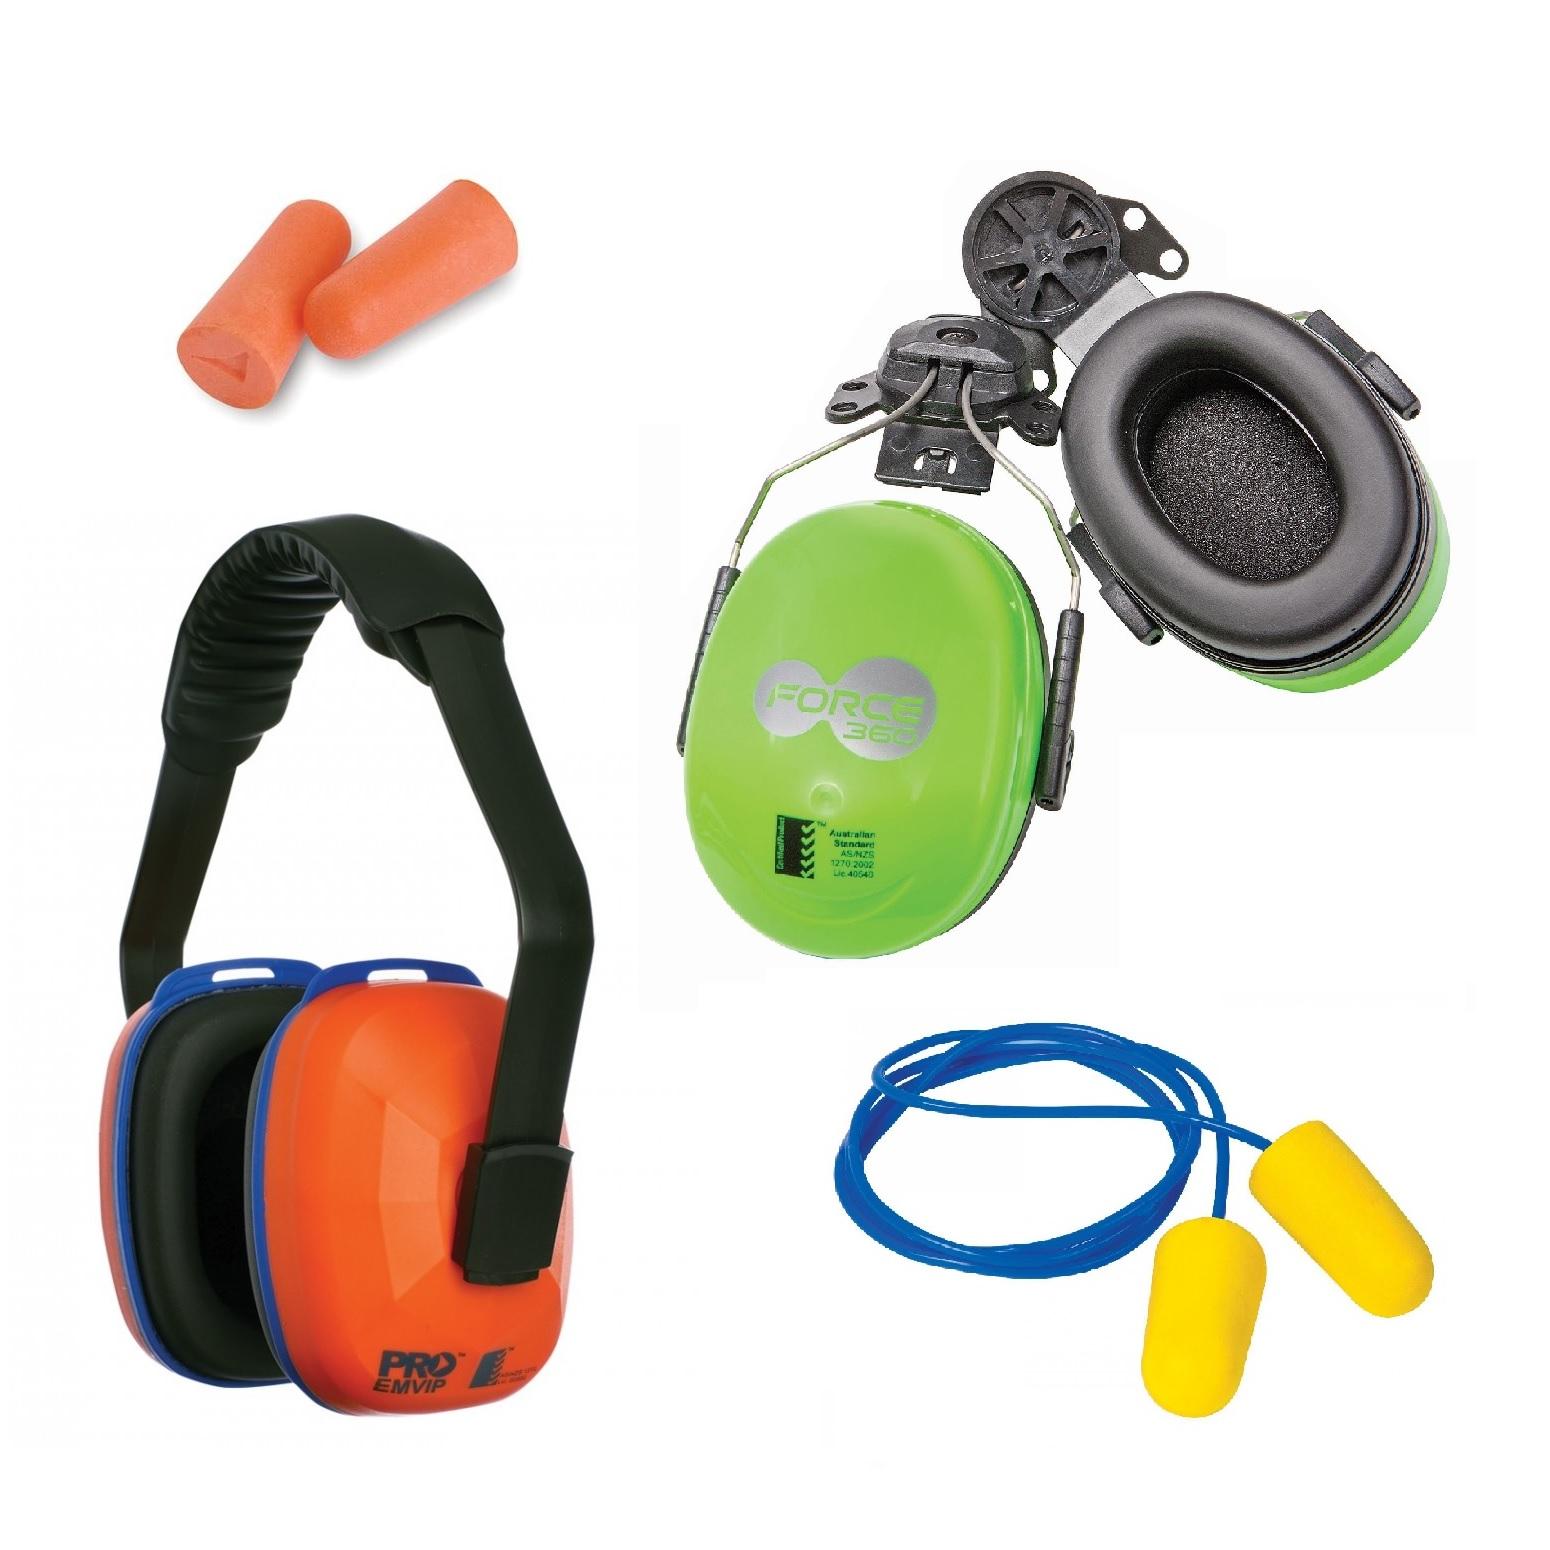 19. Hearing Protection